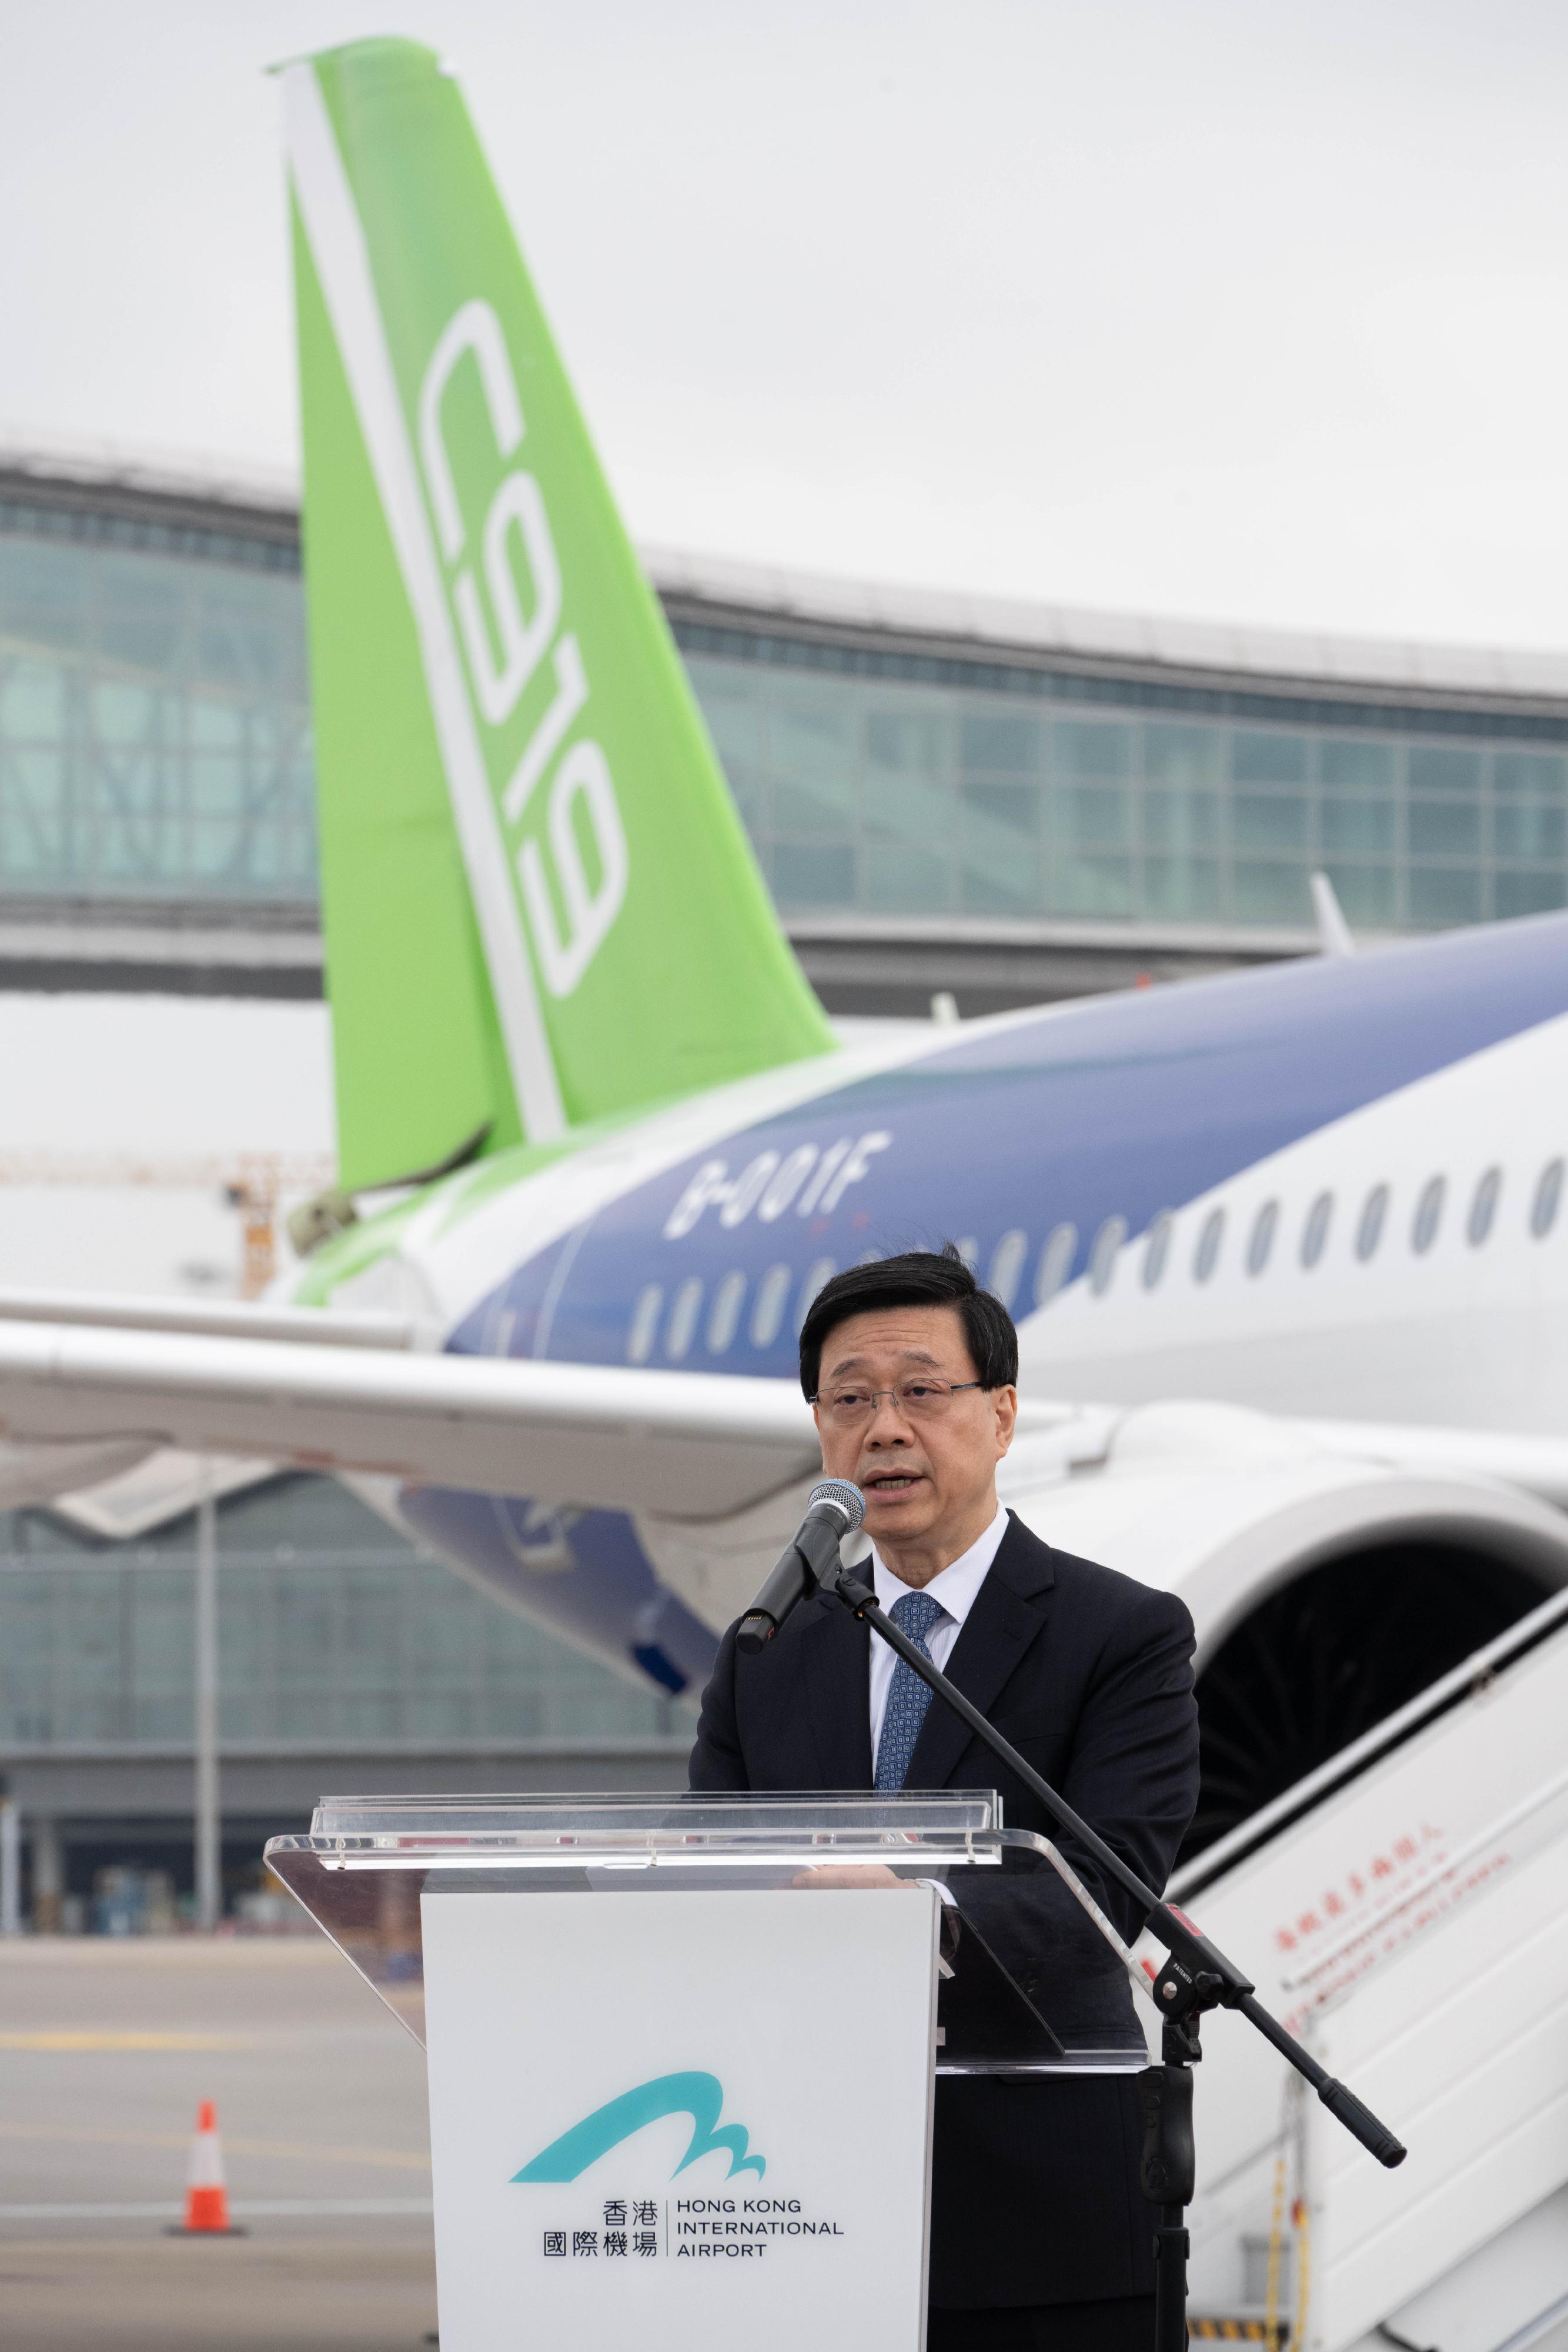 The Chief Executive, Mr John Lee, speaks at the welcome ceremony for aircraft C919 and ARJ21 today (December 13).
